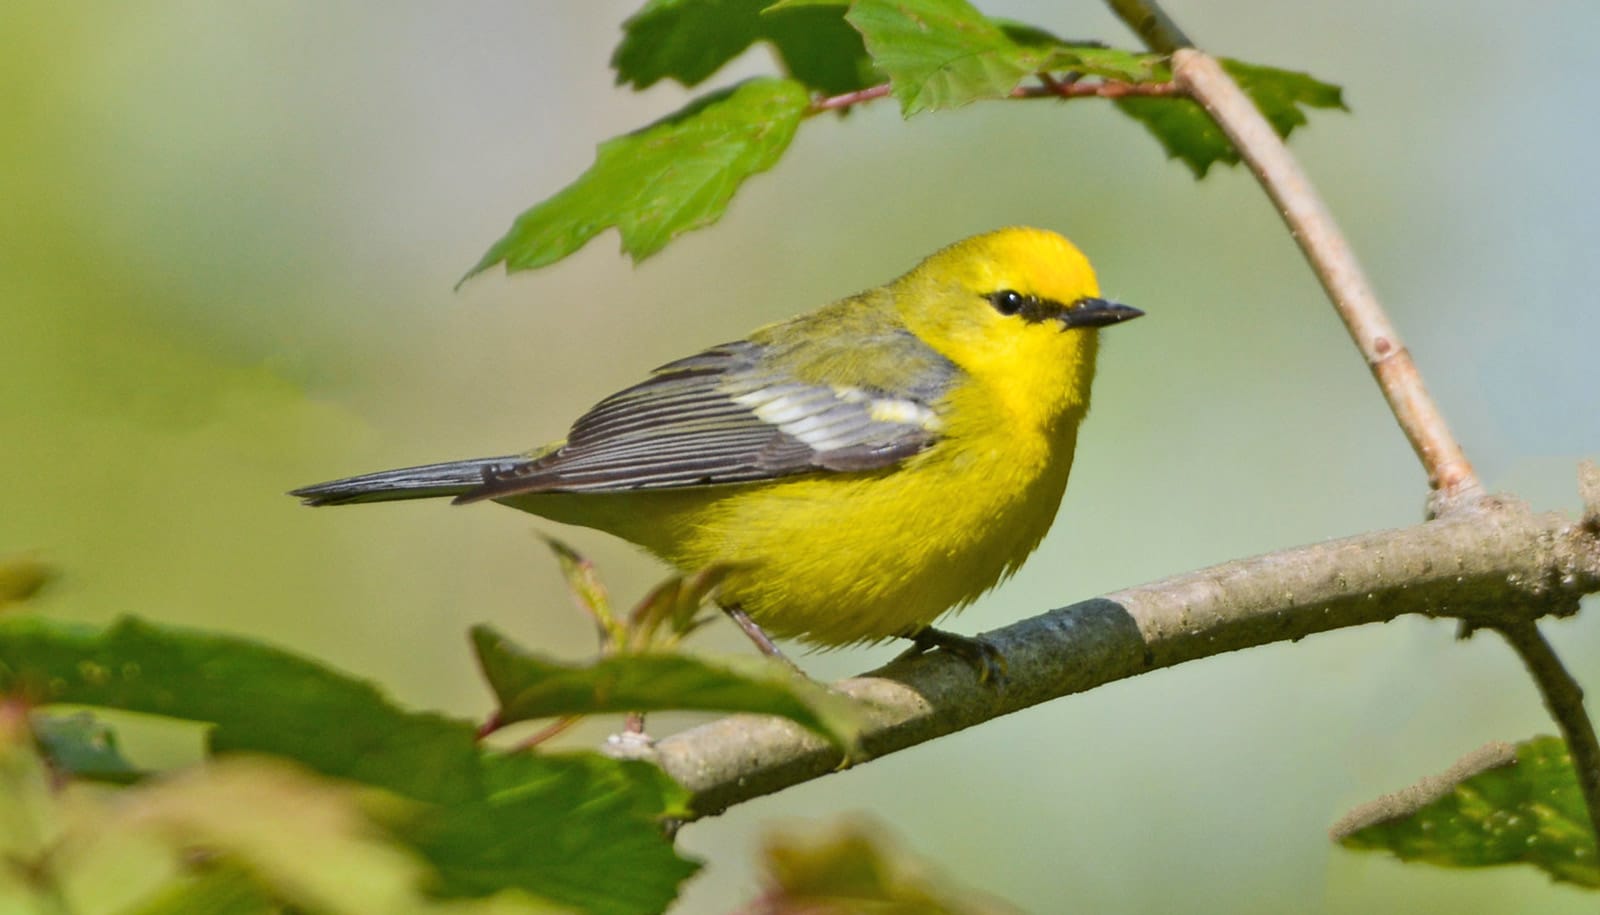 small yellow bird on branch with gray-blue wings